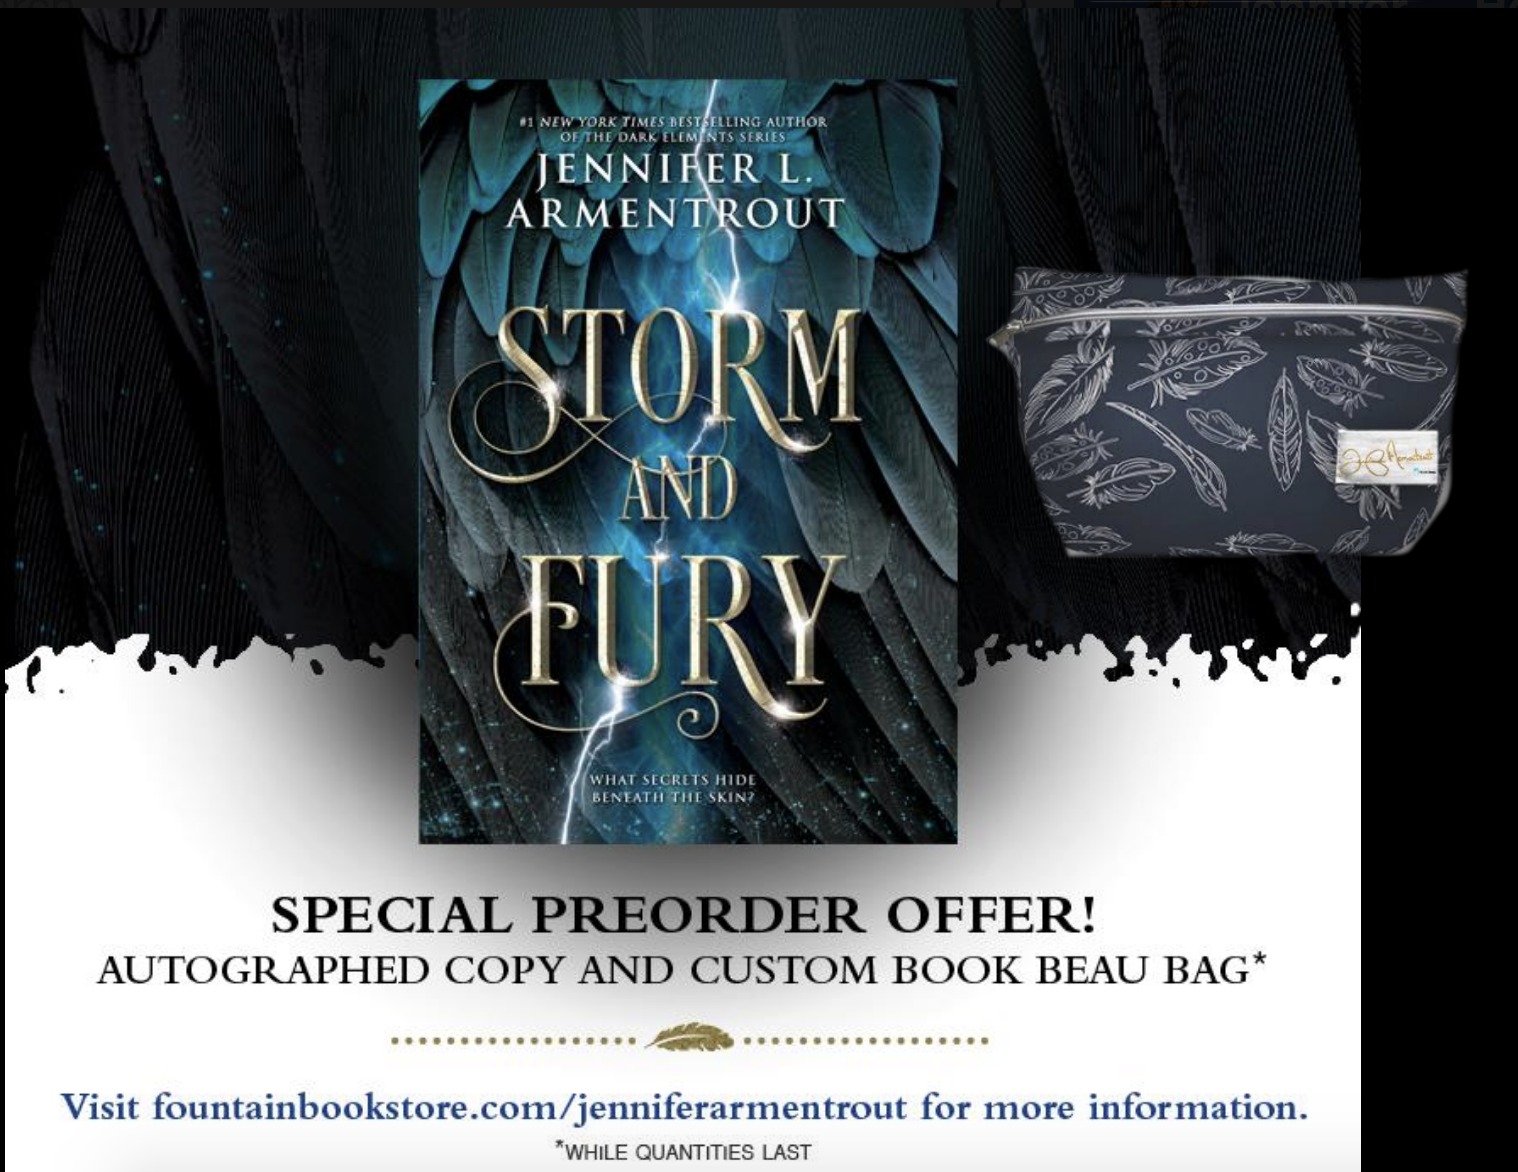 Storm and Fury by Jennifer L. Armentrout